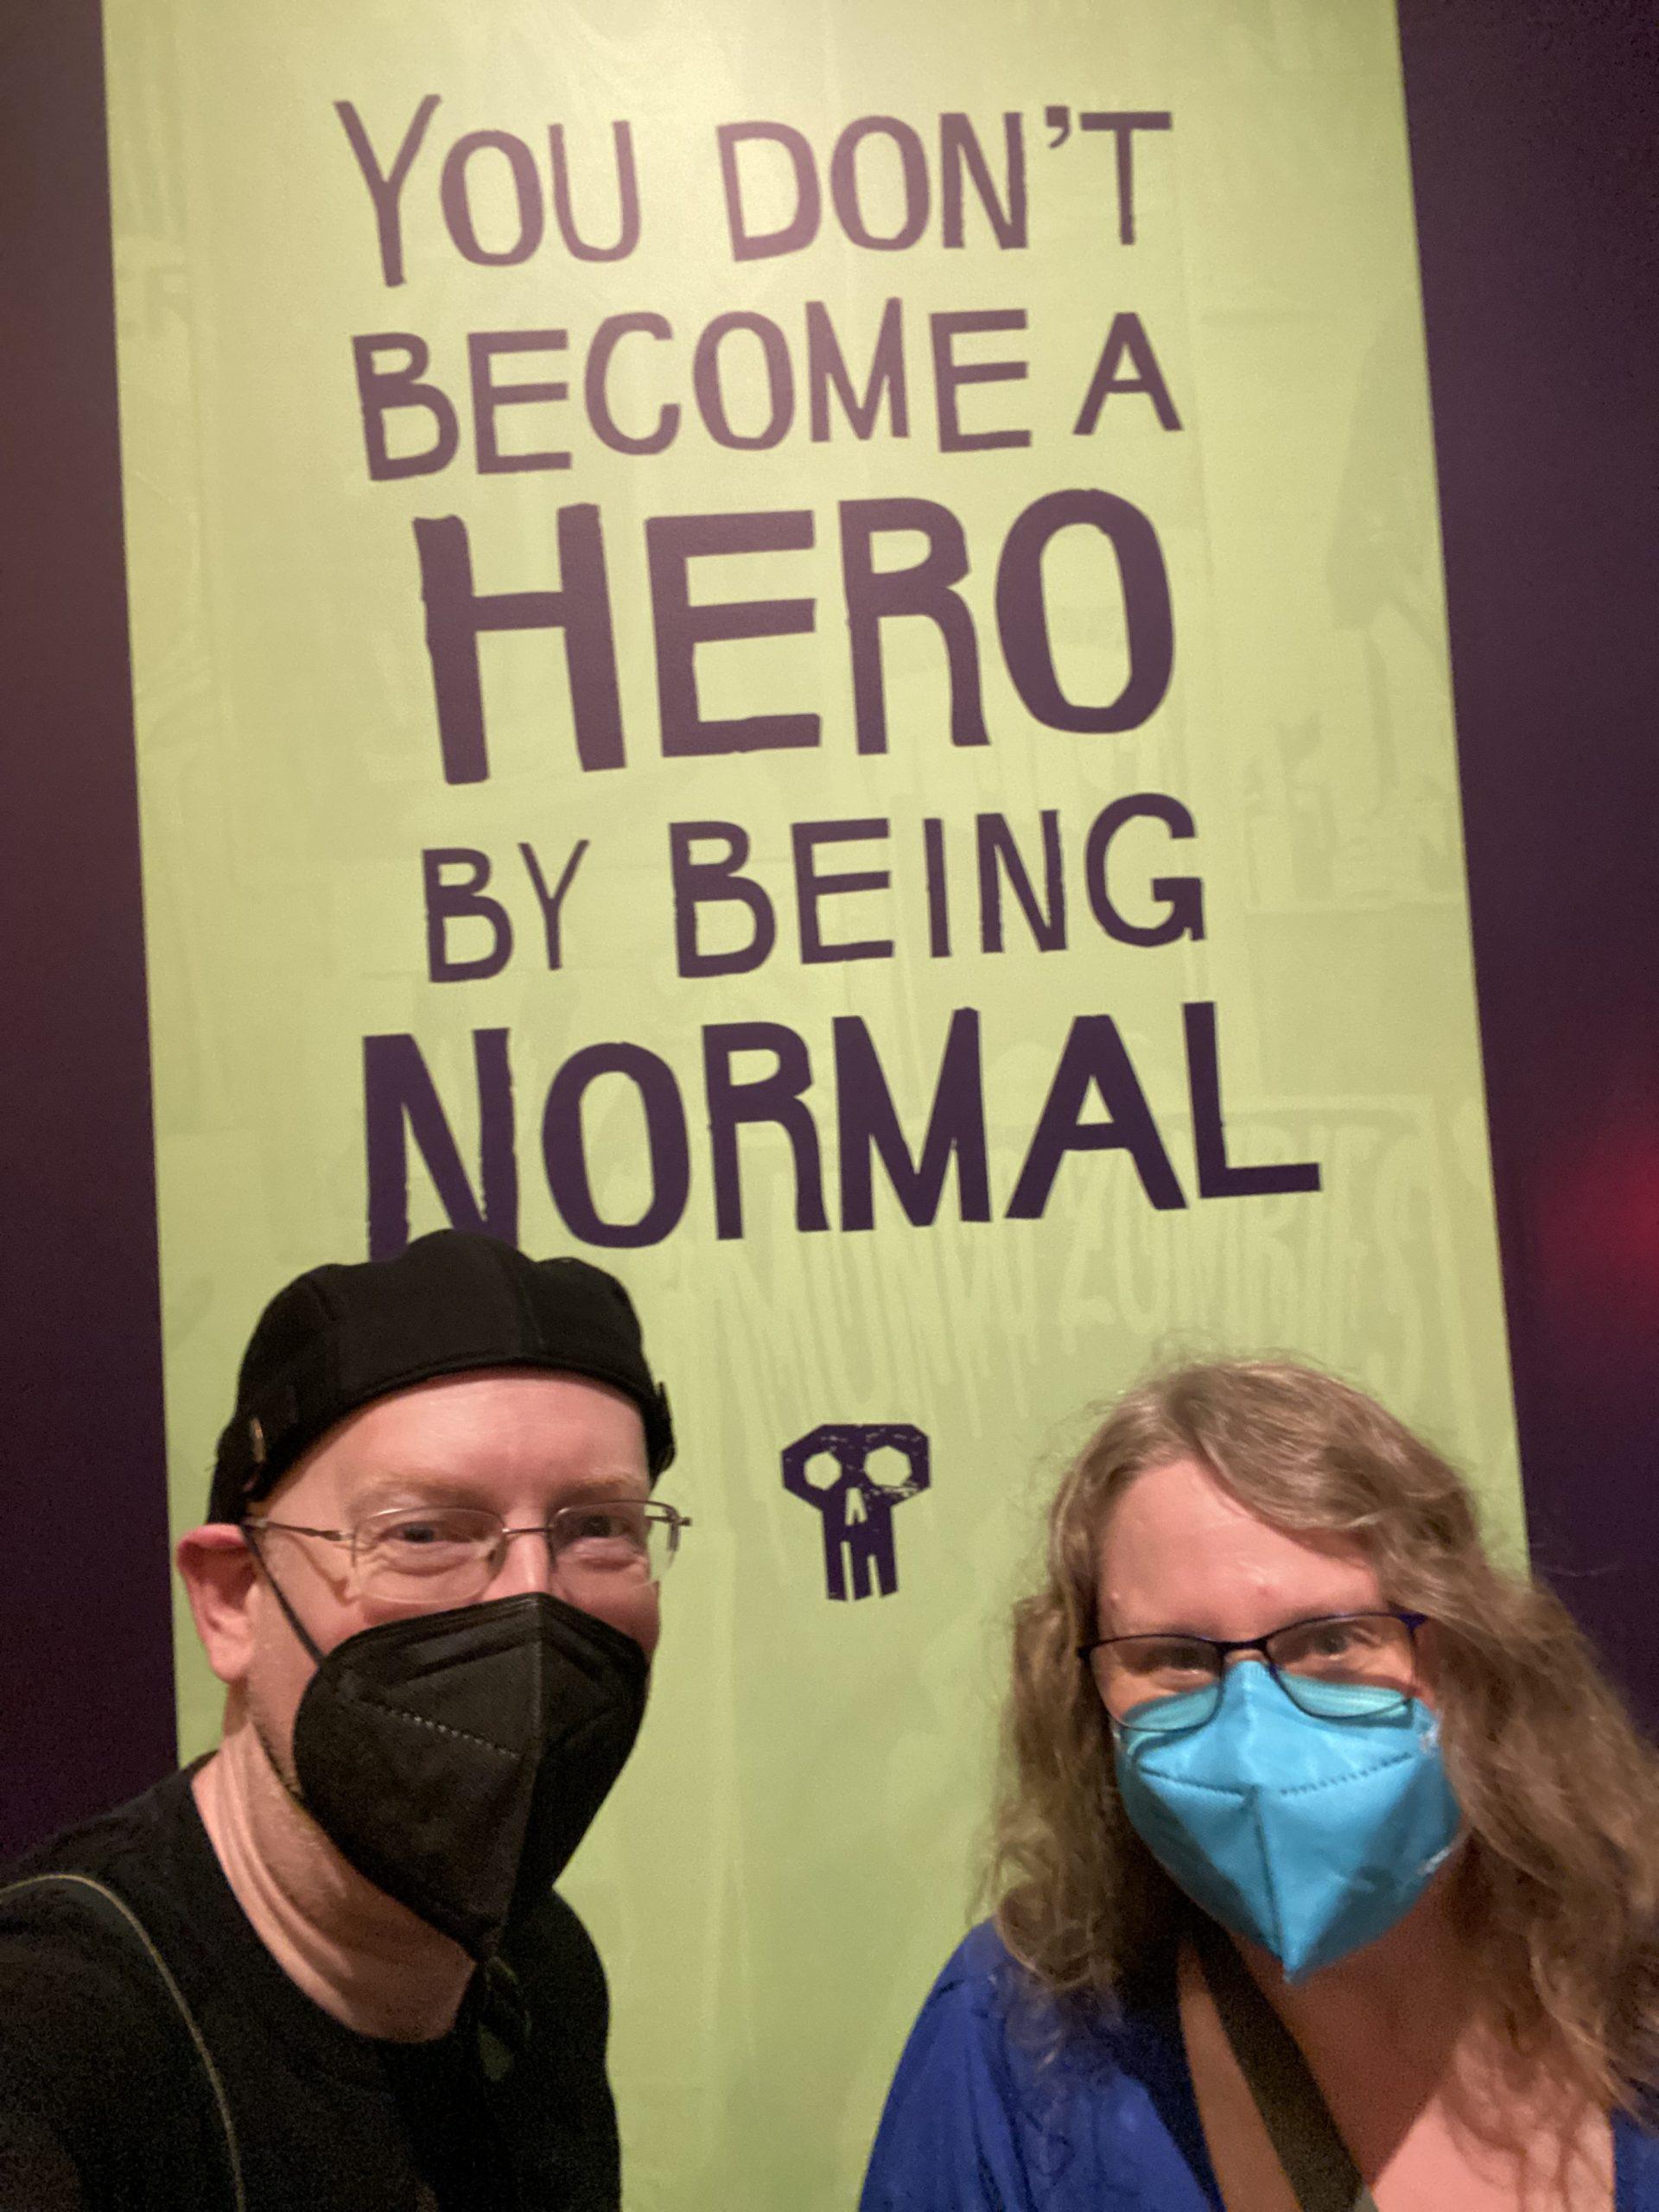 My wife and I in front of a sign saying "you don't become a hero by being normal".